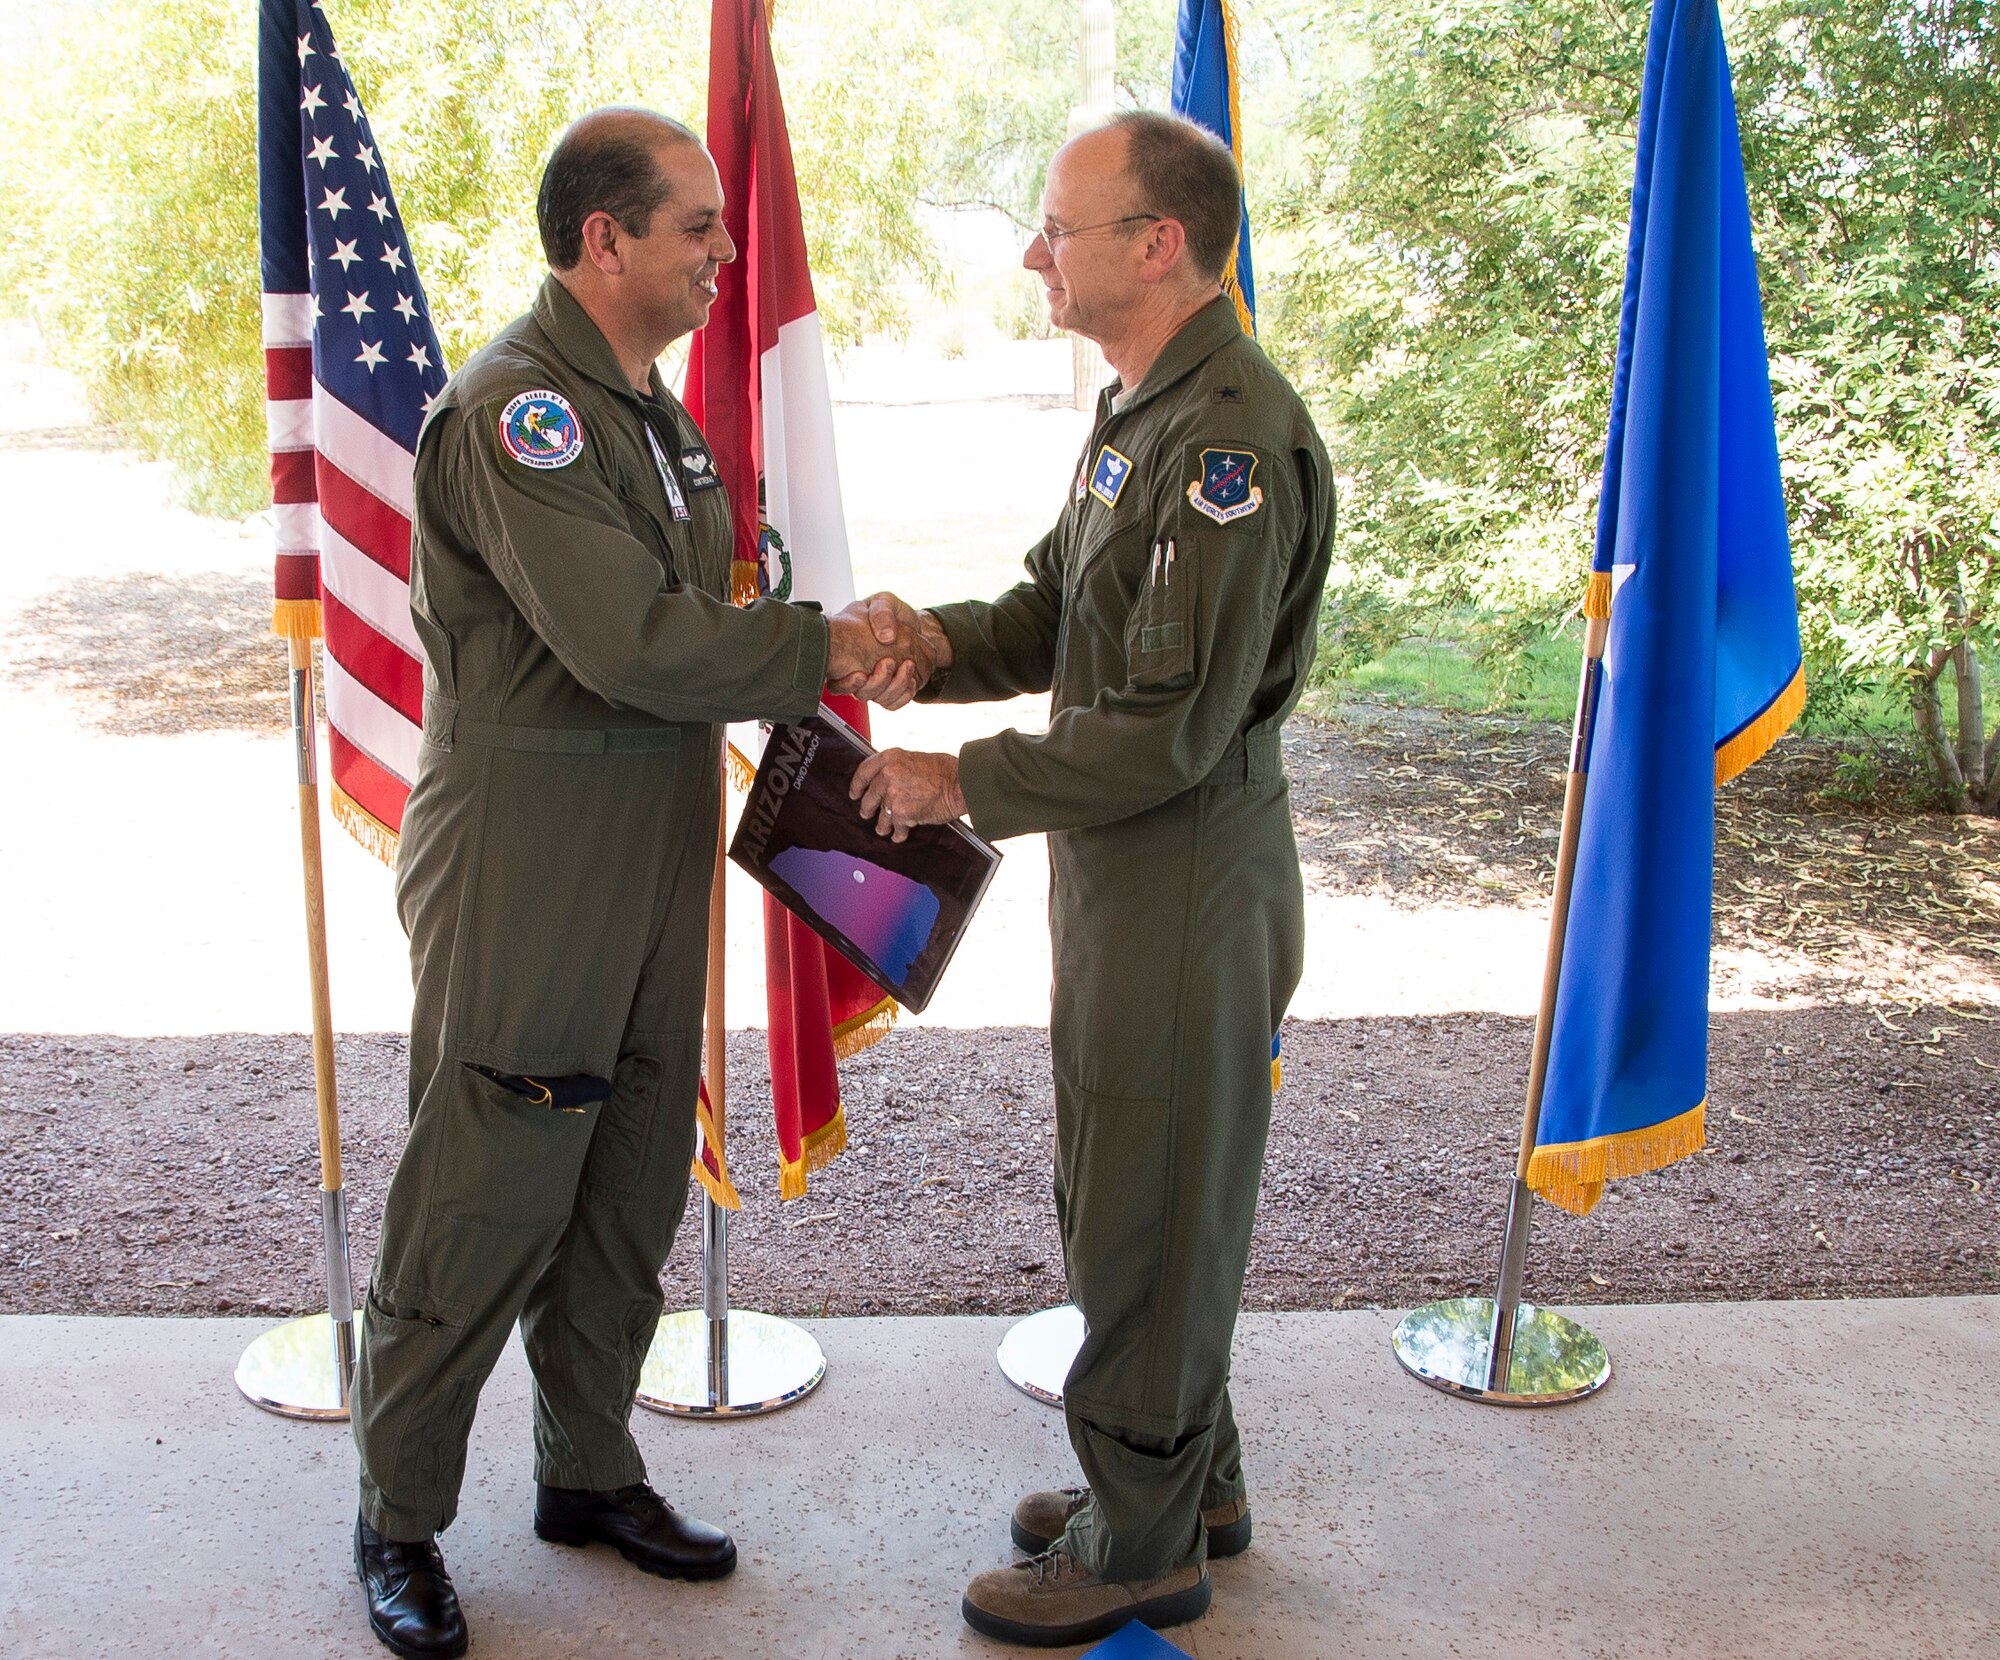 Peruvian Maj. Gen. Mario Contreras, director of the Central Hospital of the Peruvian Air Force, and U.S. Air Force Brig. Gen. Donald Lindberg, 12th AF (AFSOUTH) mobilization assistant to the commander, exchange gifts during a bar-b-que to celebrate the end of PANAMAX 2015, on Davis-Monthan AFB, Ariz., Aug. 4, 2015. The PANAMAX exercise is designed to provide interoperability training for participating multinational staffs, as well as help build-up participating nation’s capability to plan and execute complex multinational operations. (U.S. Air Force photo by Staff Sgt. Adam Grant/Released)